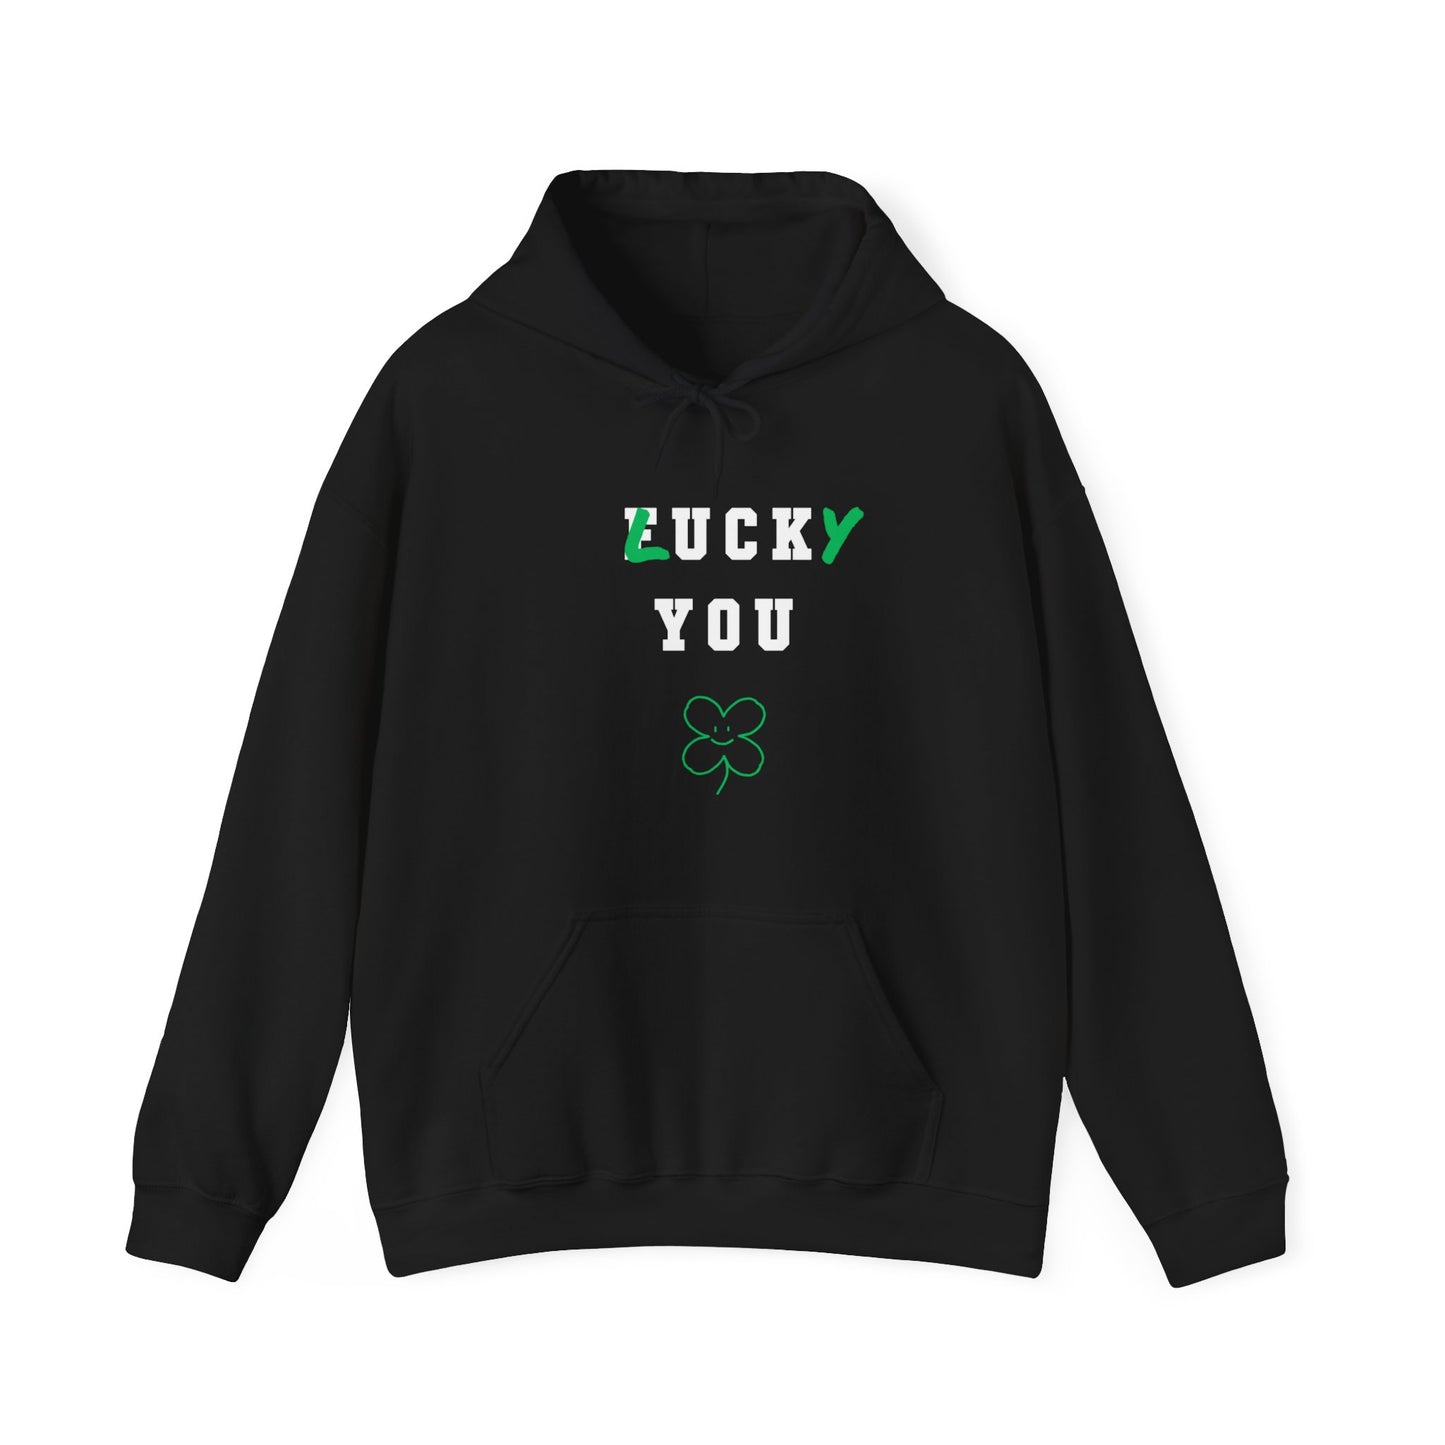 "Lucky you" - Hoodie